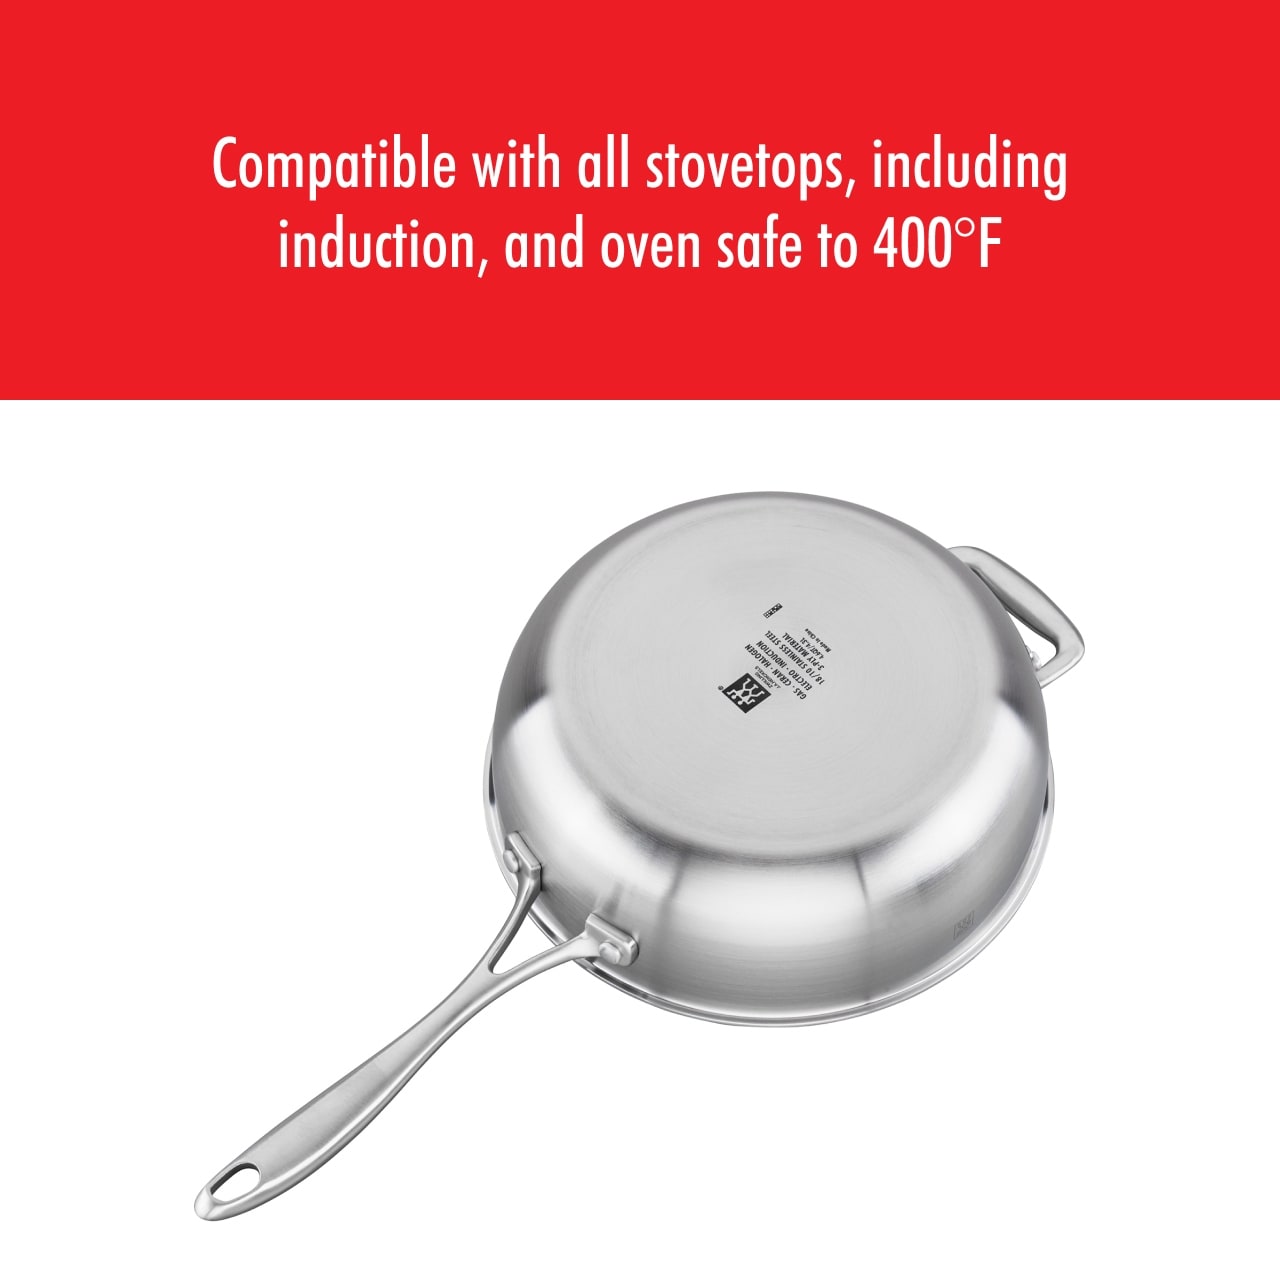 https://ak1.ostkcdn.com/images/products/is/images/direct/de4570e8478b233c19dac562f84a69d49567d1b3/ZWILLING-Spirit-3-ply-4.6-qt-Stainless-Steel-Ceramic-Nonstick-Perfect-Pan.jpg